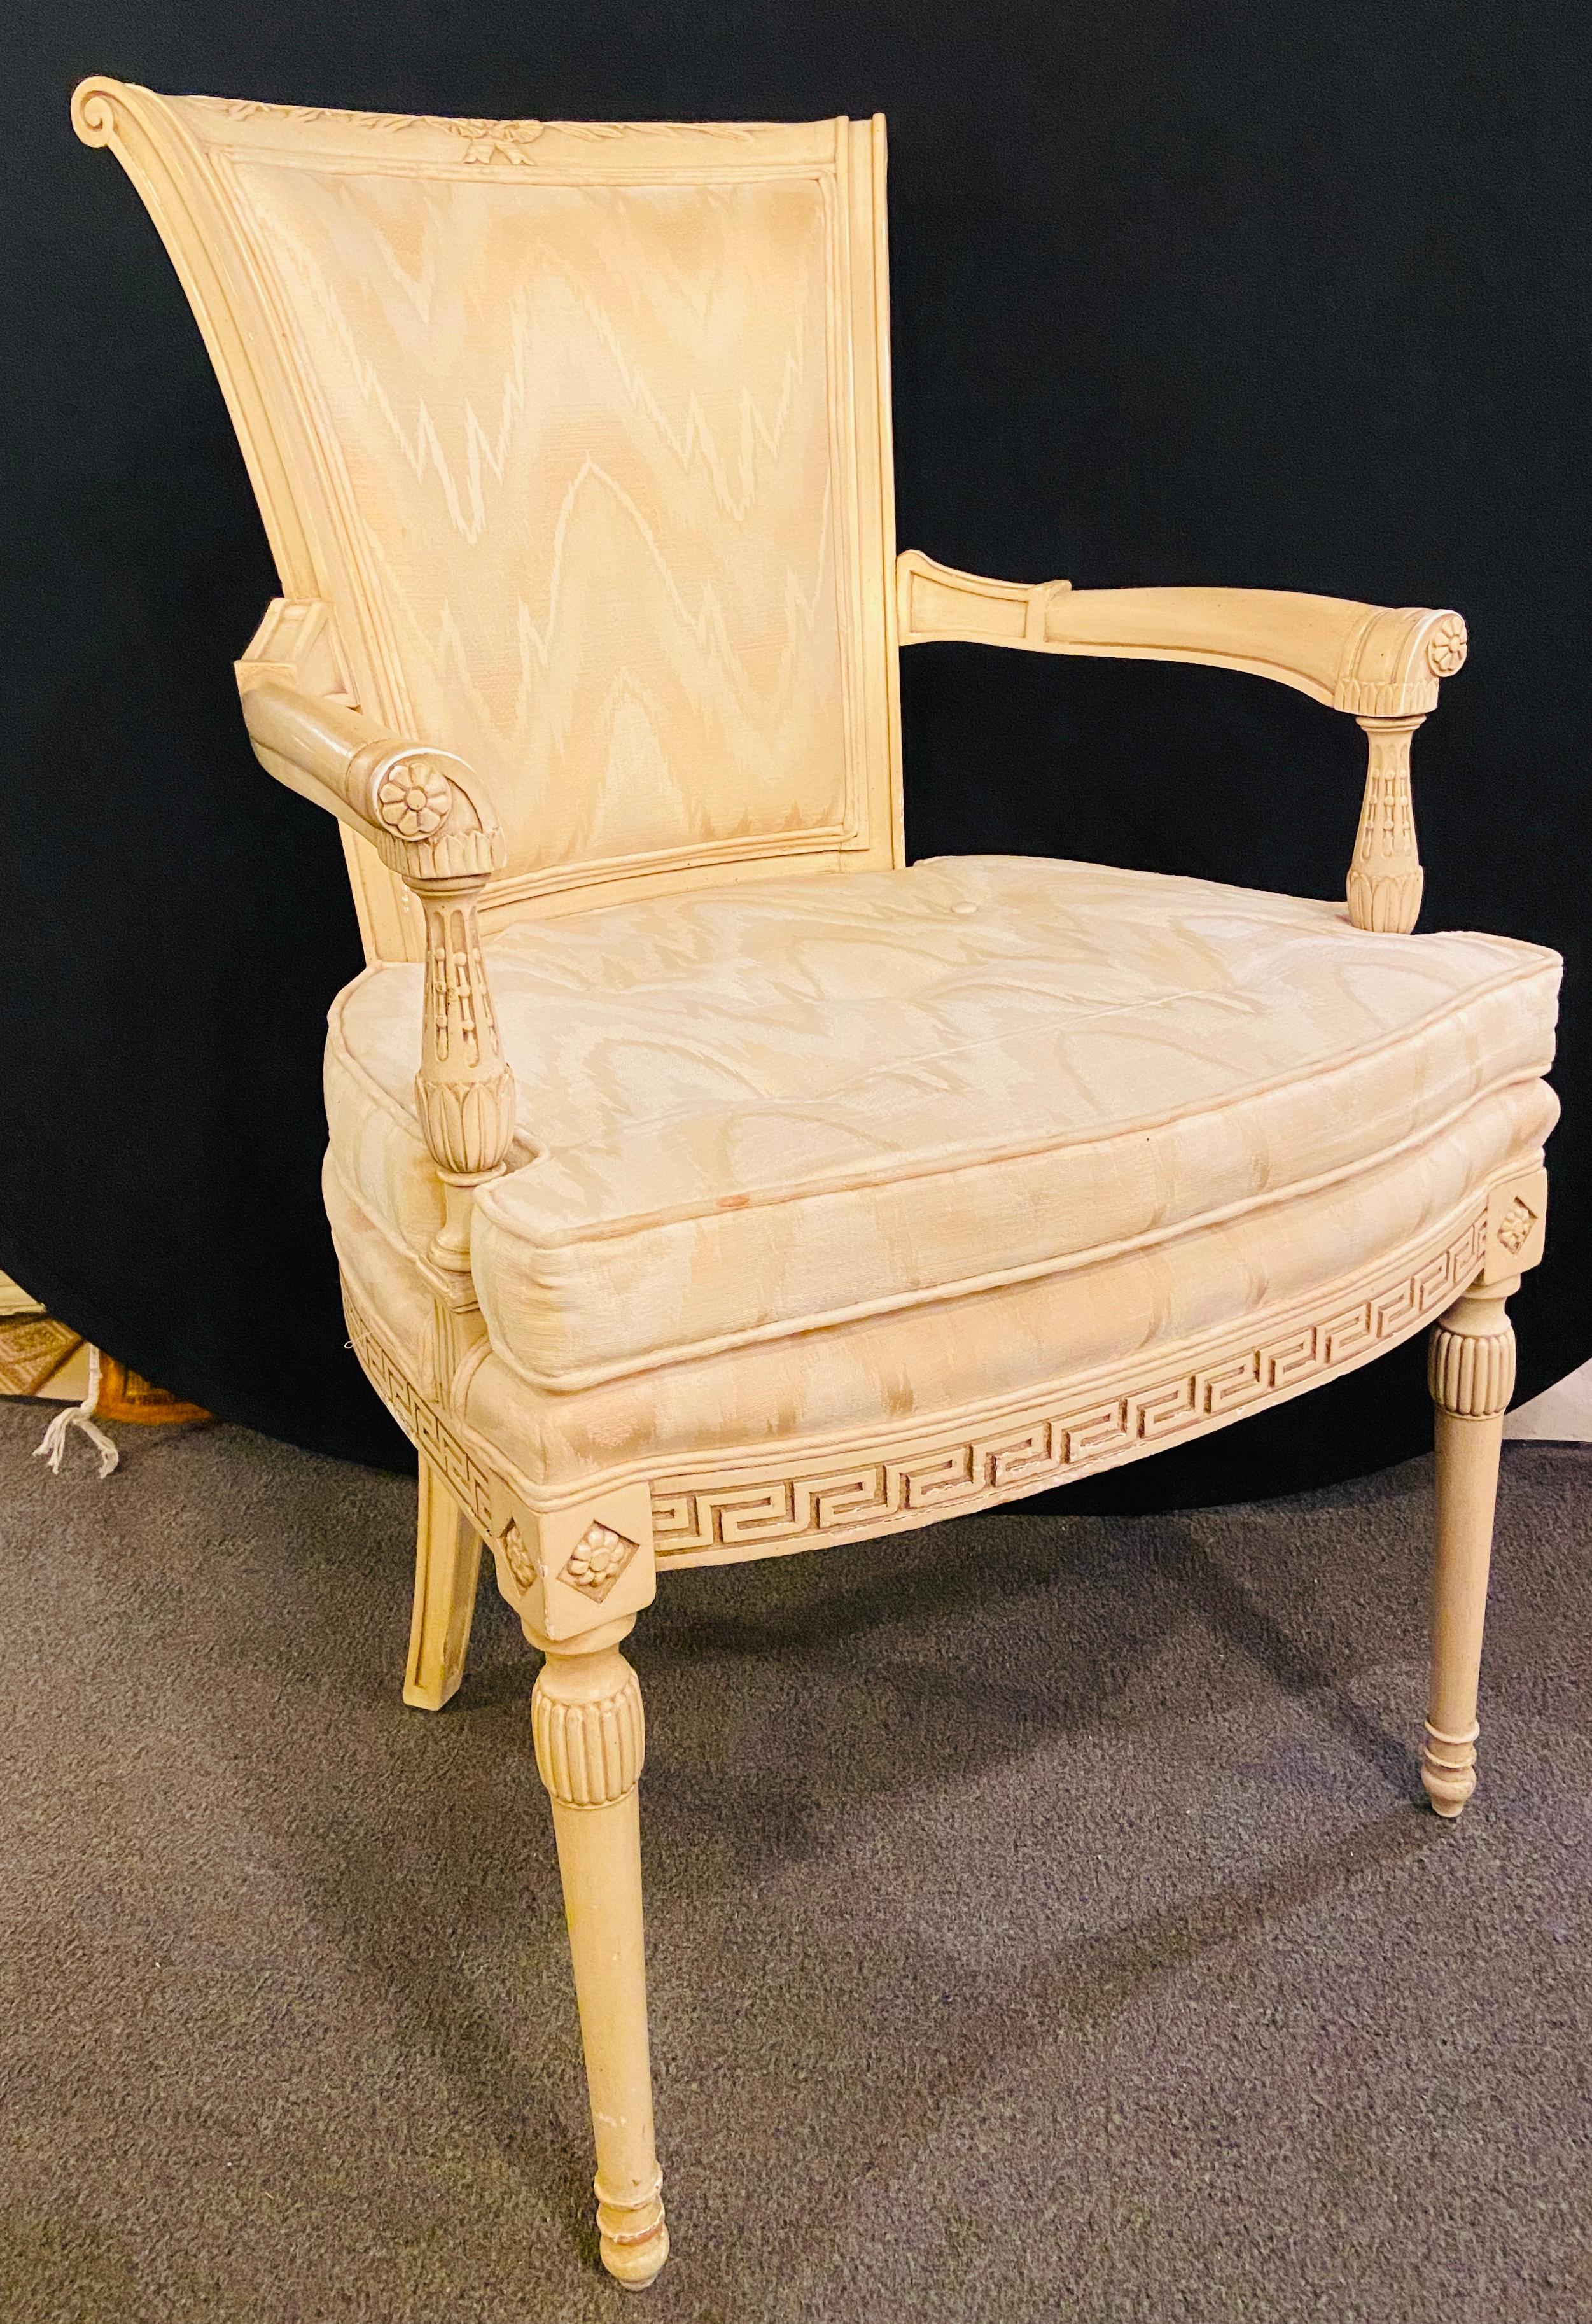 Swedish paint decorated Greek key design desk, arm, bergère chair.

A beautiful white Swedish mid-20th century Greek key design decorated chair. The upholstery is in great condition. The hand carved wood is done exquisitely and make it very